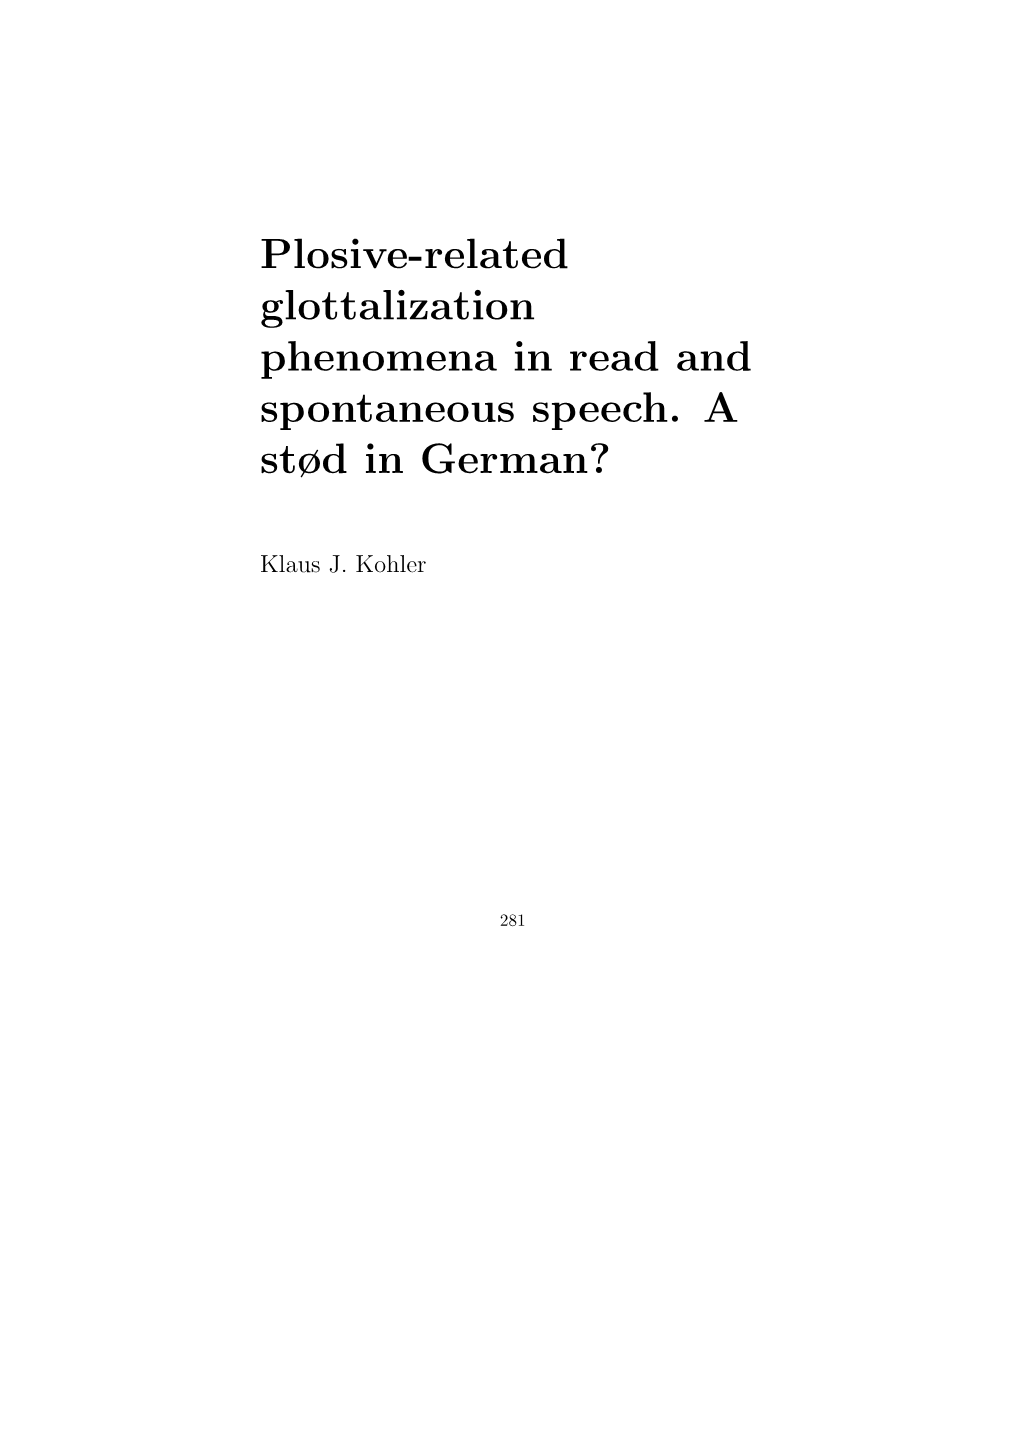 Plosive-Related Glottalization Phenomena in Read and Spontaneous Speech